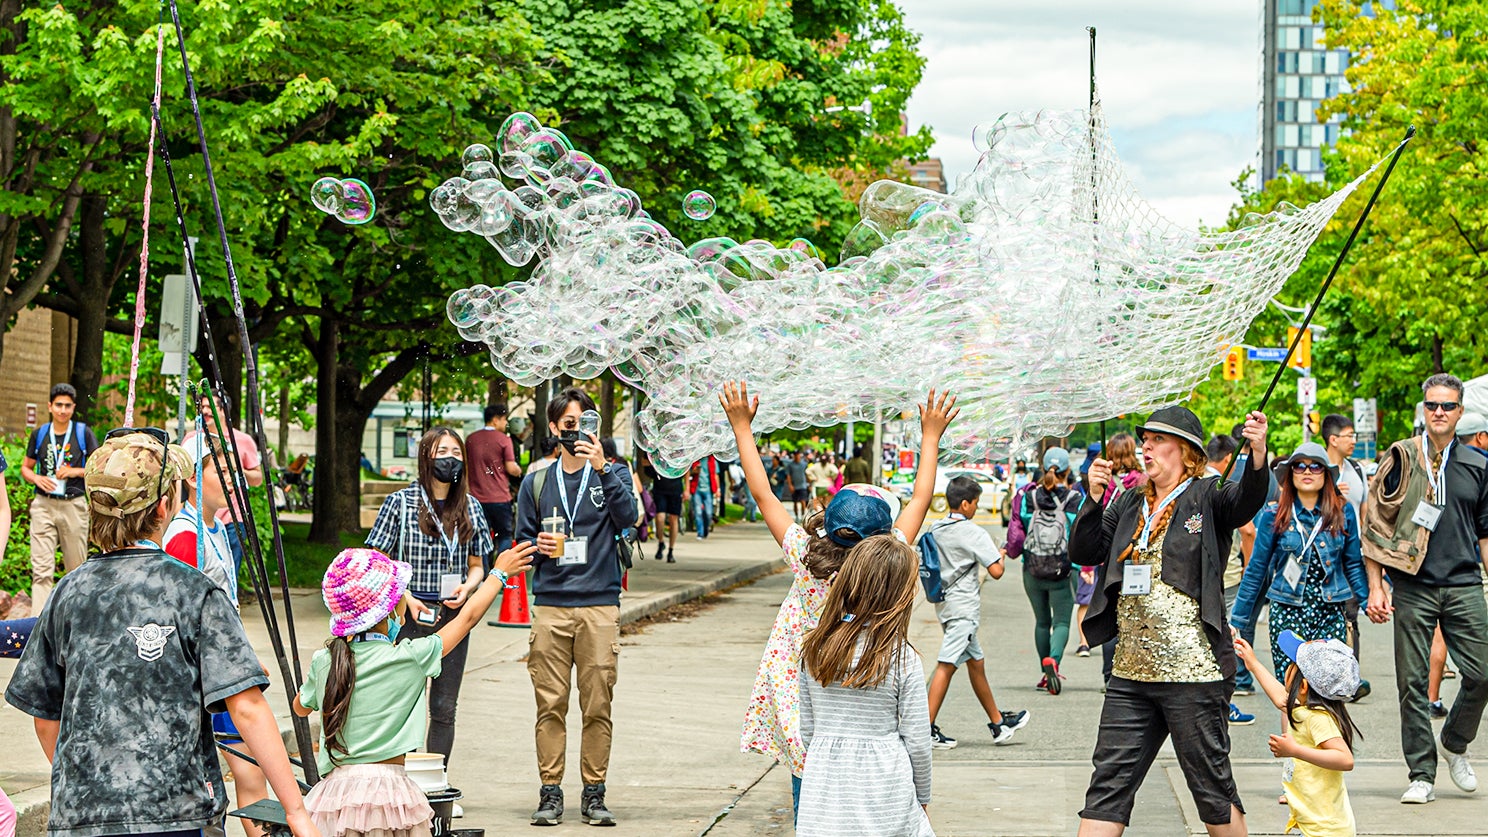 a street performer makes soap bubbles on the street during alumni fest